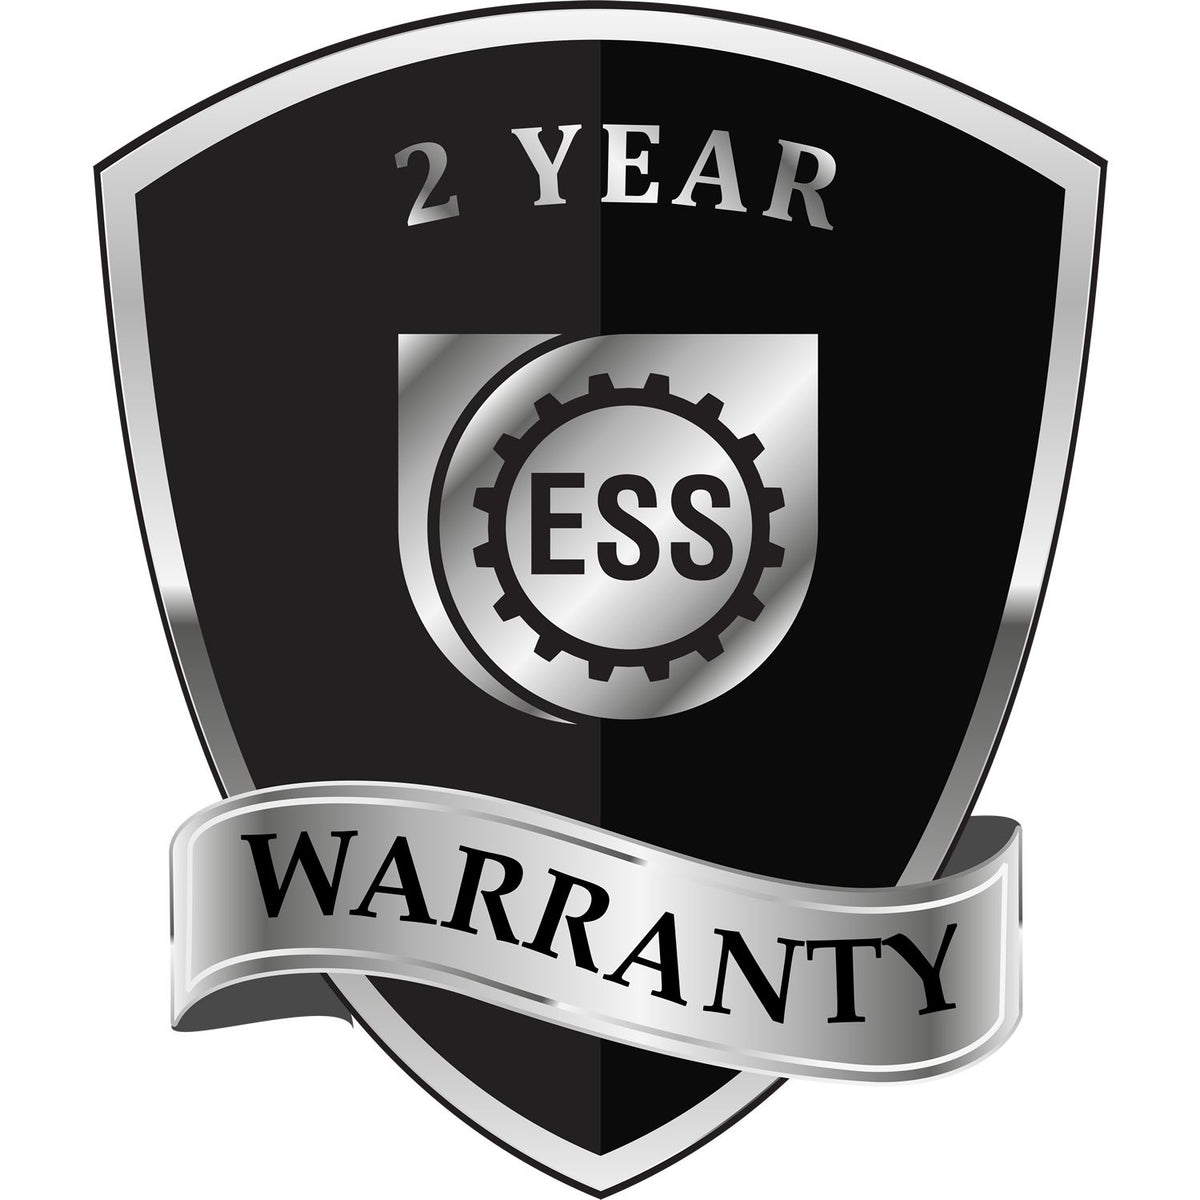 A badge or emblem showing a warranty icon for the State of Iowa Extended Long Reach Engineer Seal